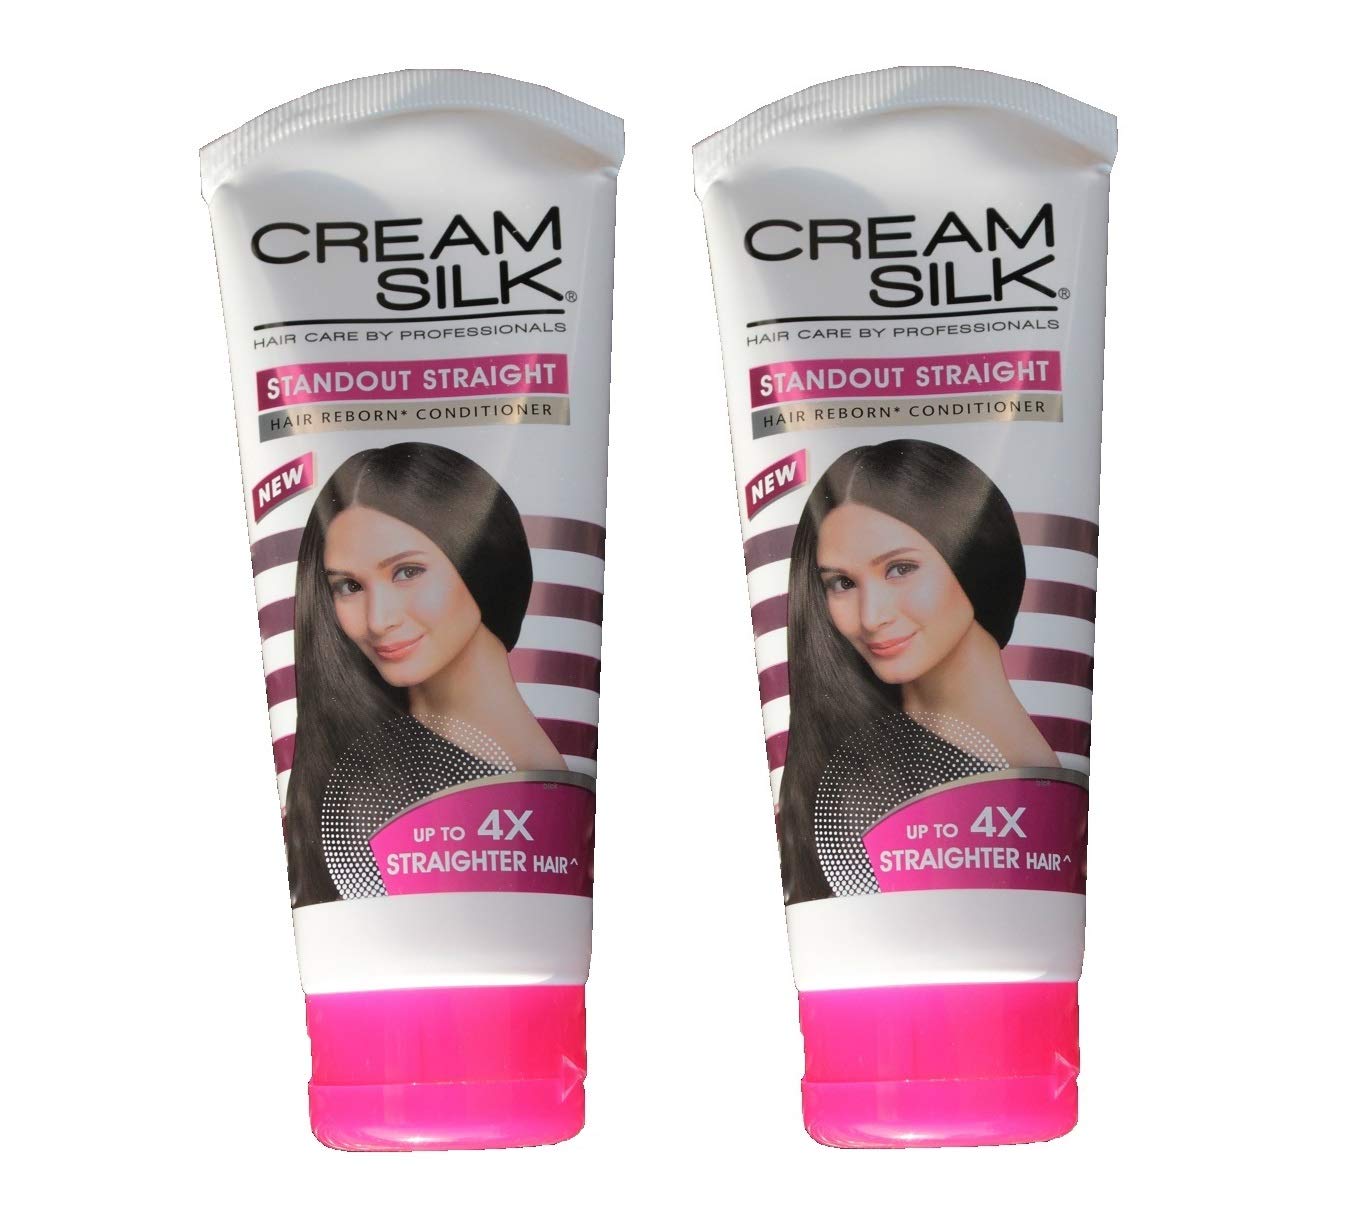 Lot of 2 Cream Silk Conditioner Standout Straight for Straighter Hair Creamsilk 180ml